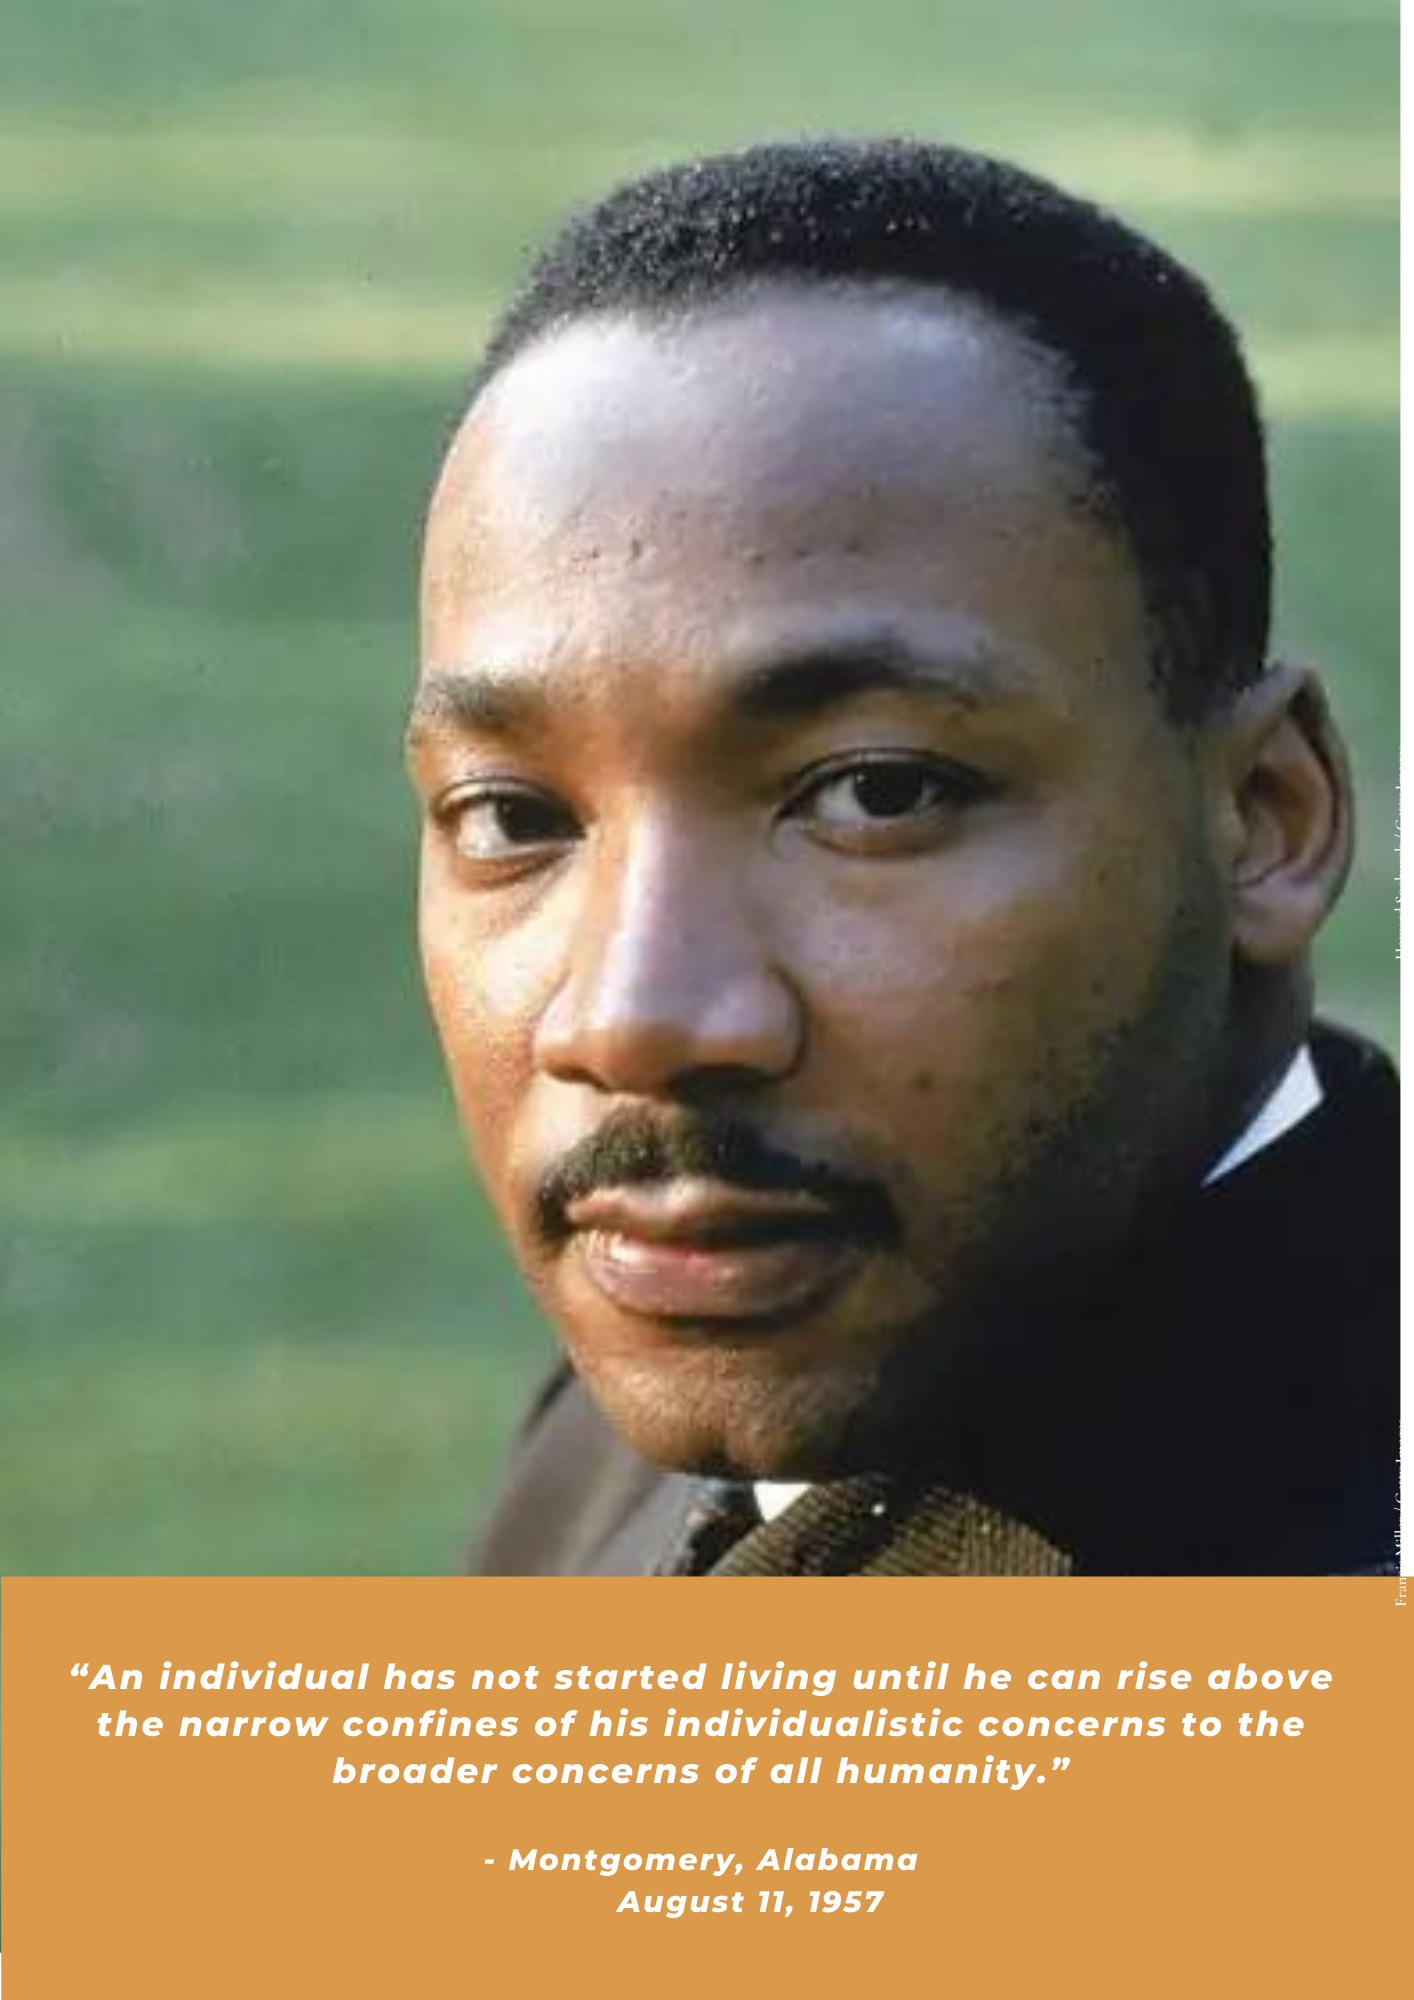 Image of Martin Luther King Jr. with quotation.